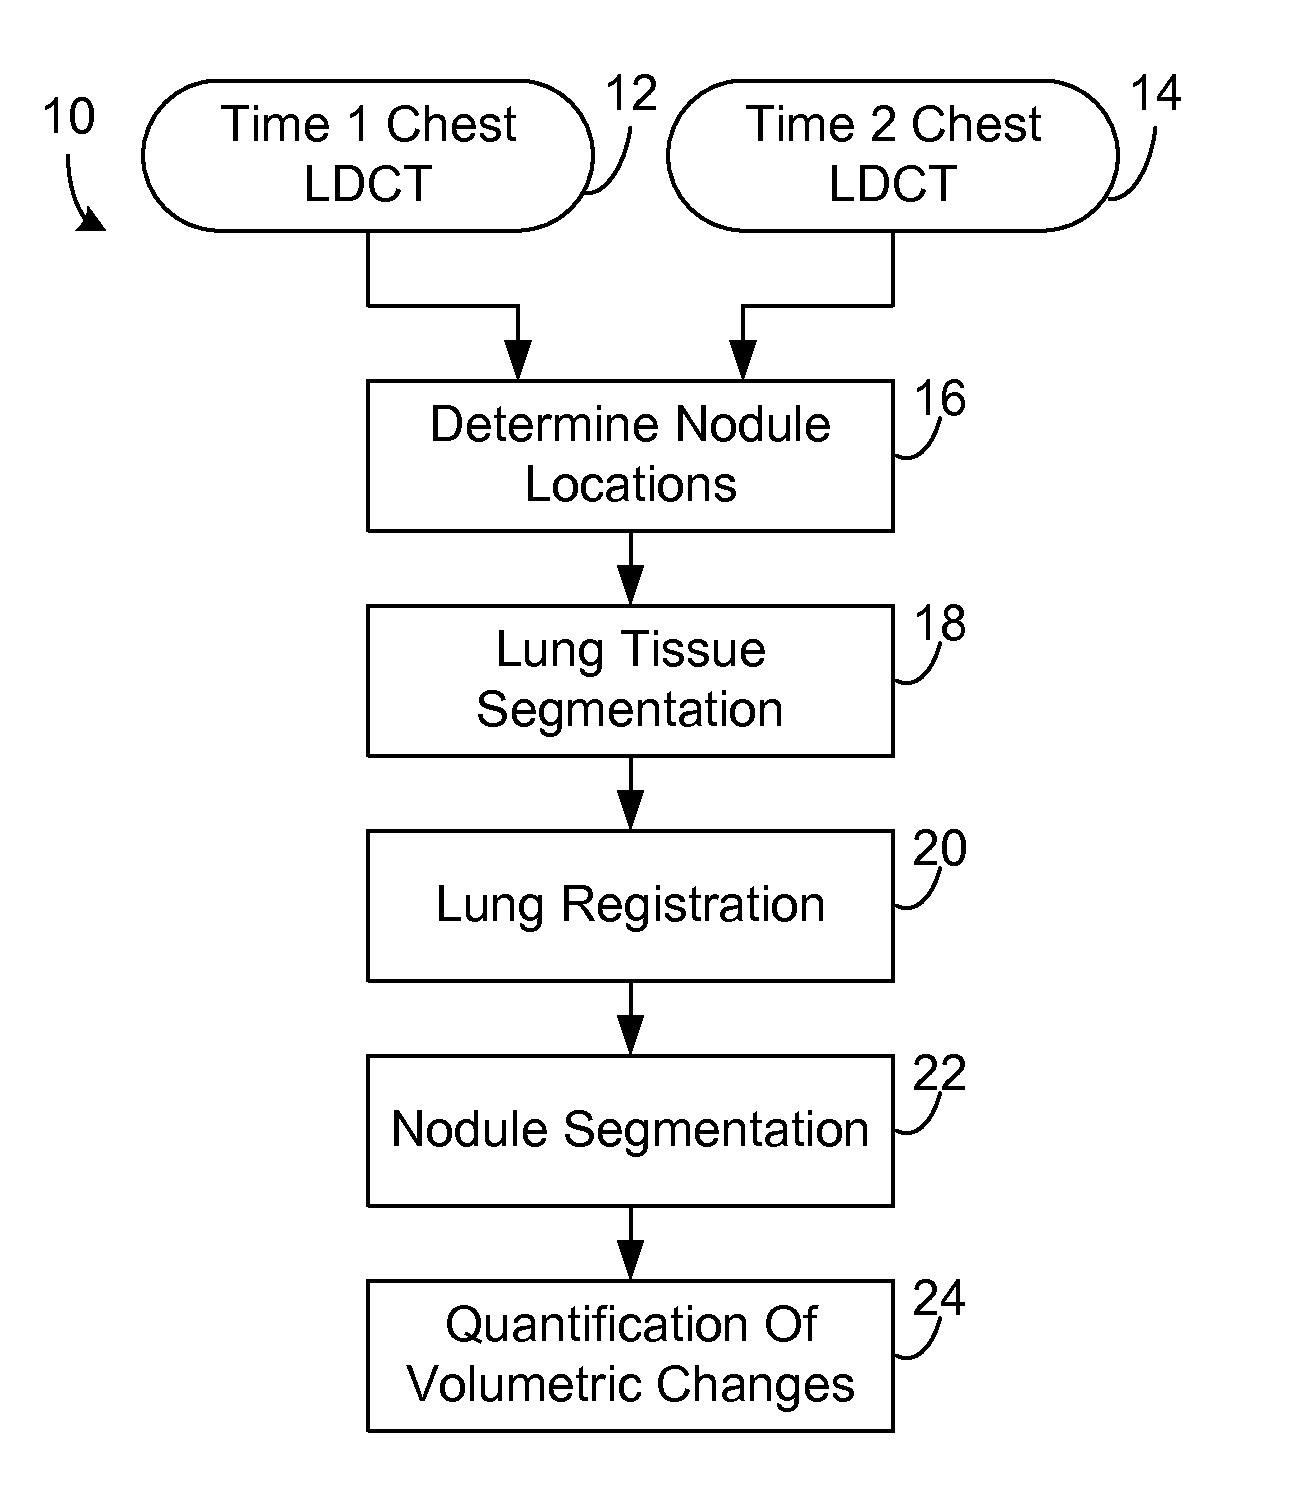 Computer aided diagnostic system incorporating lung segmentation and registration